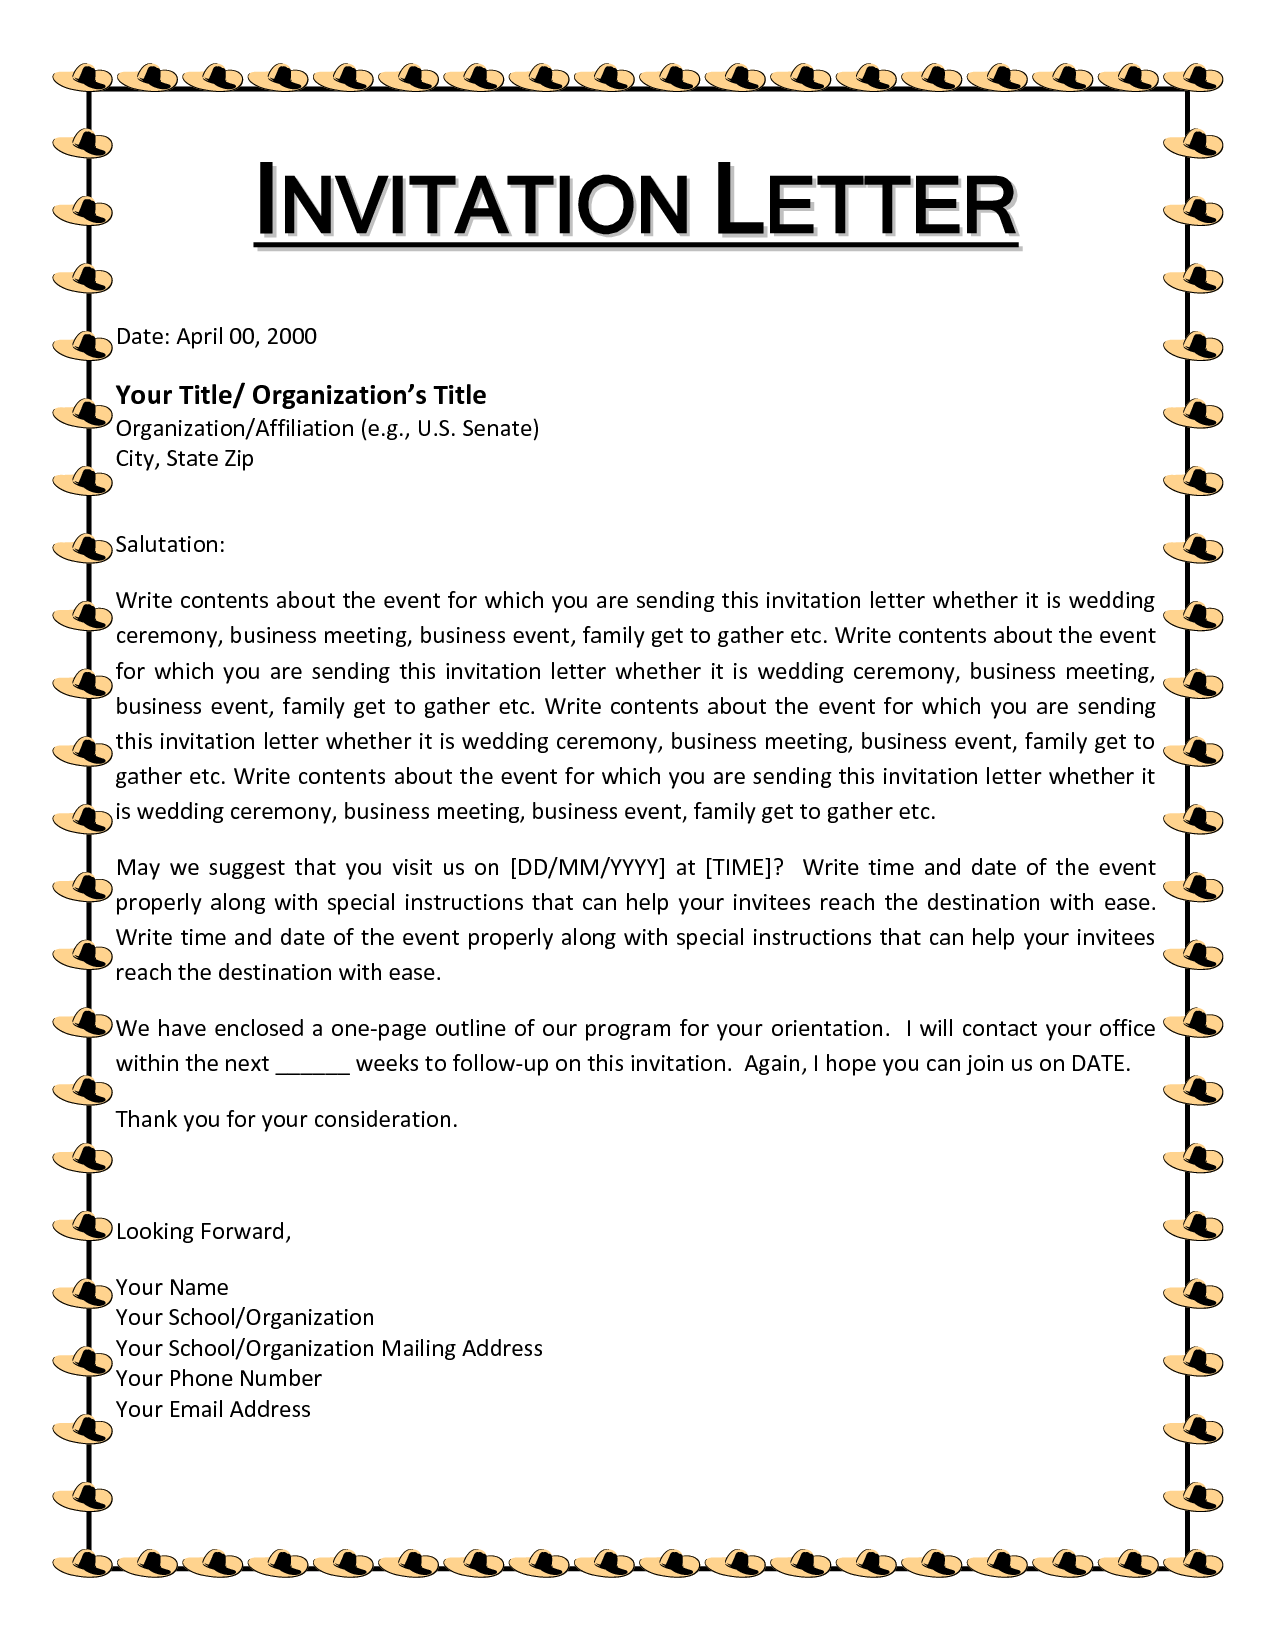 Writing an Invitation Letter for a Visa Application